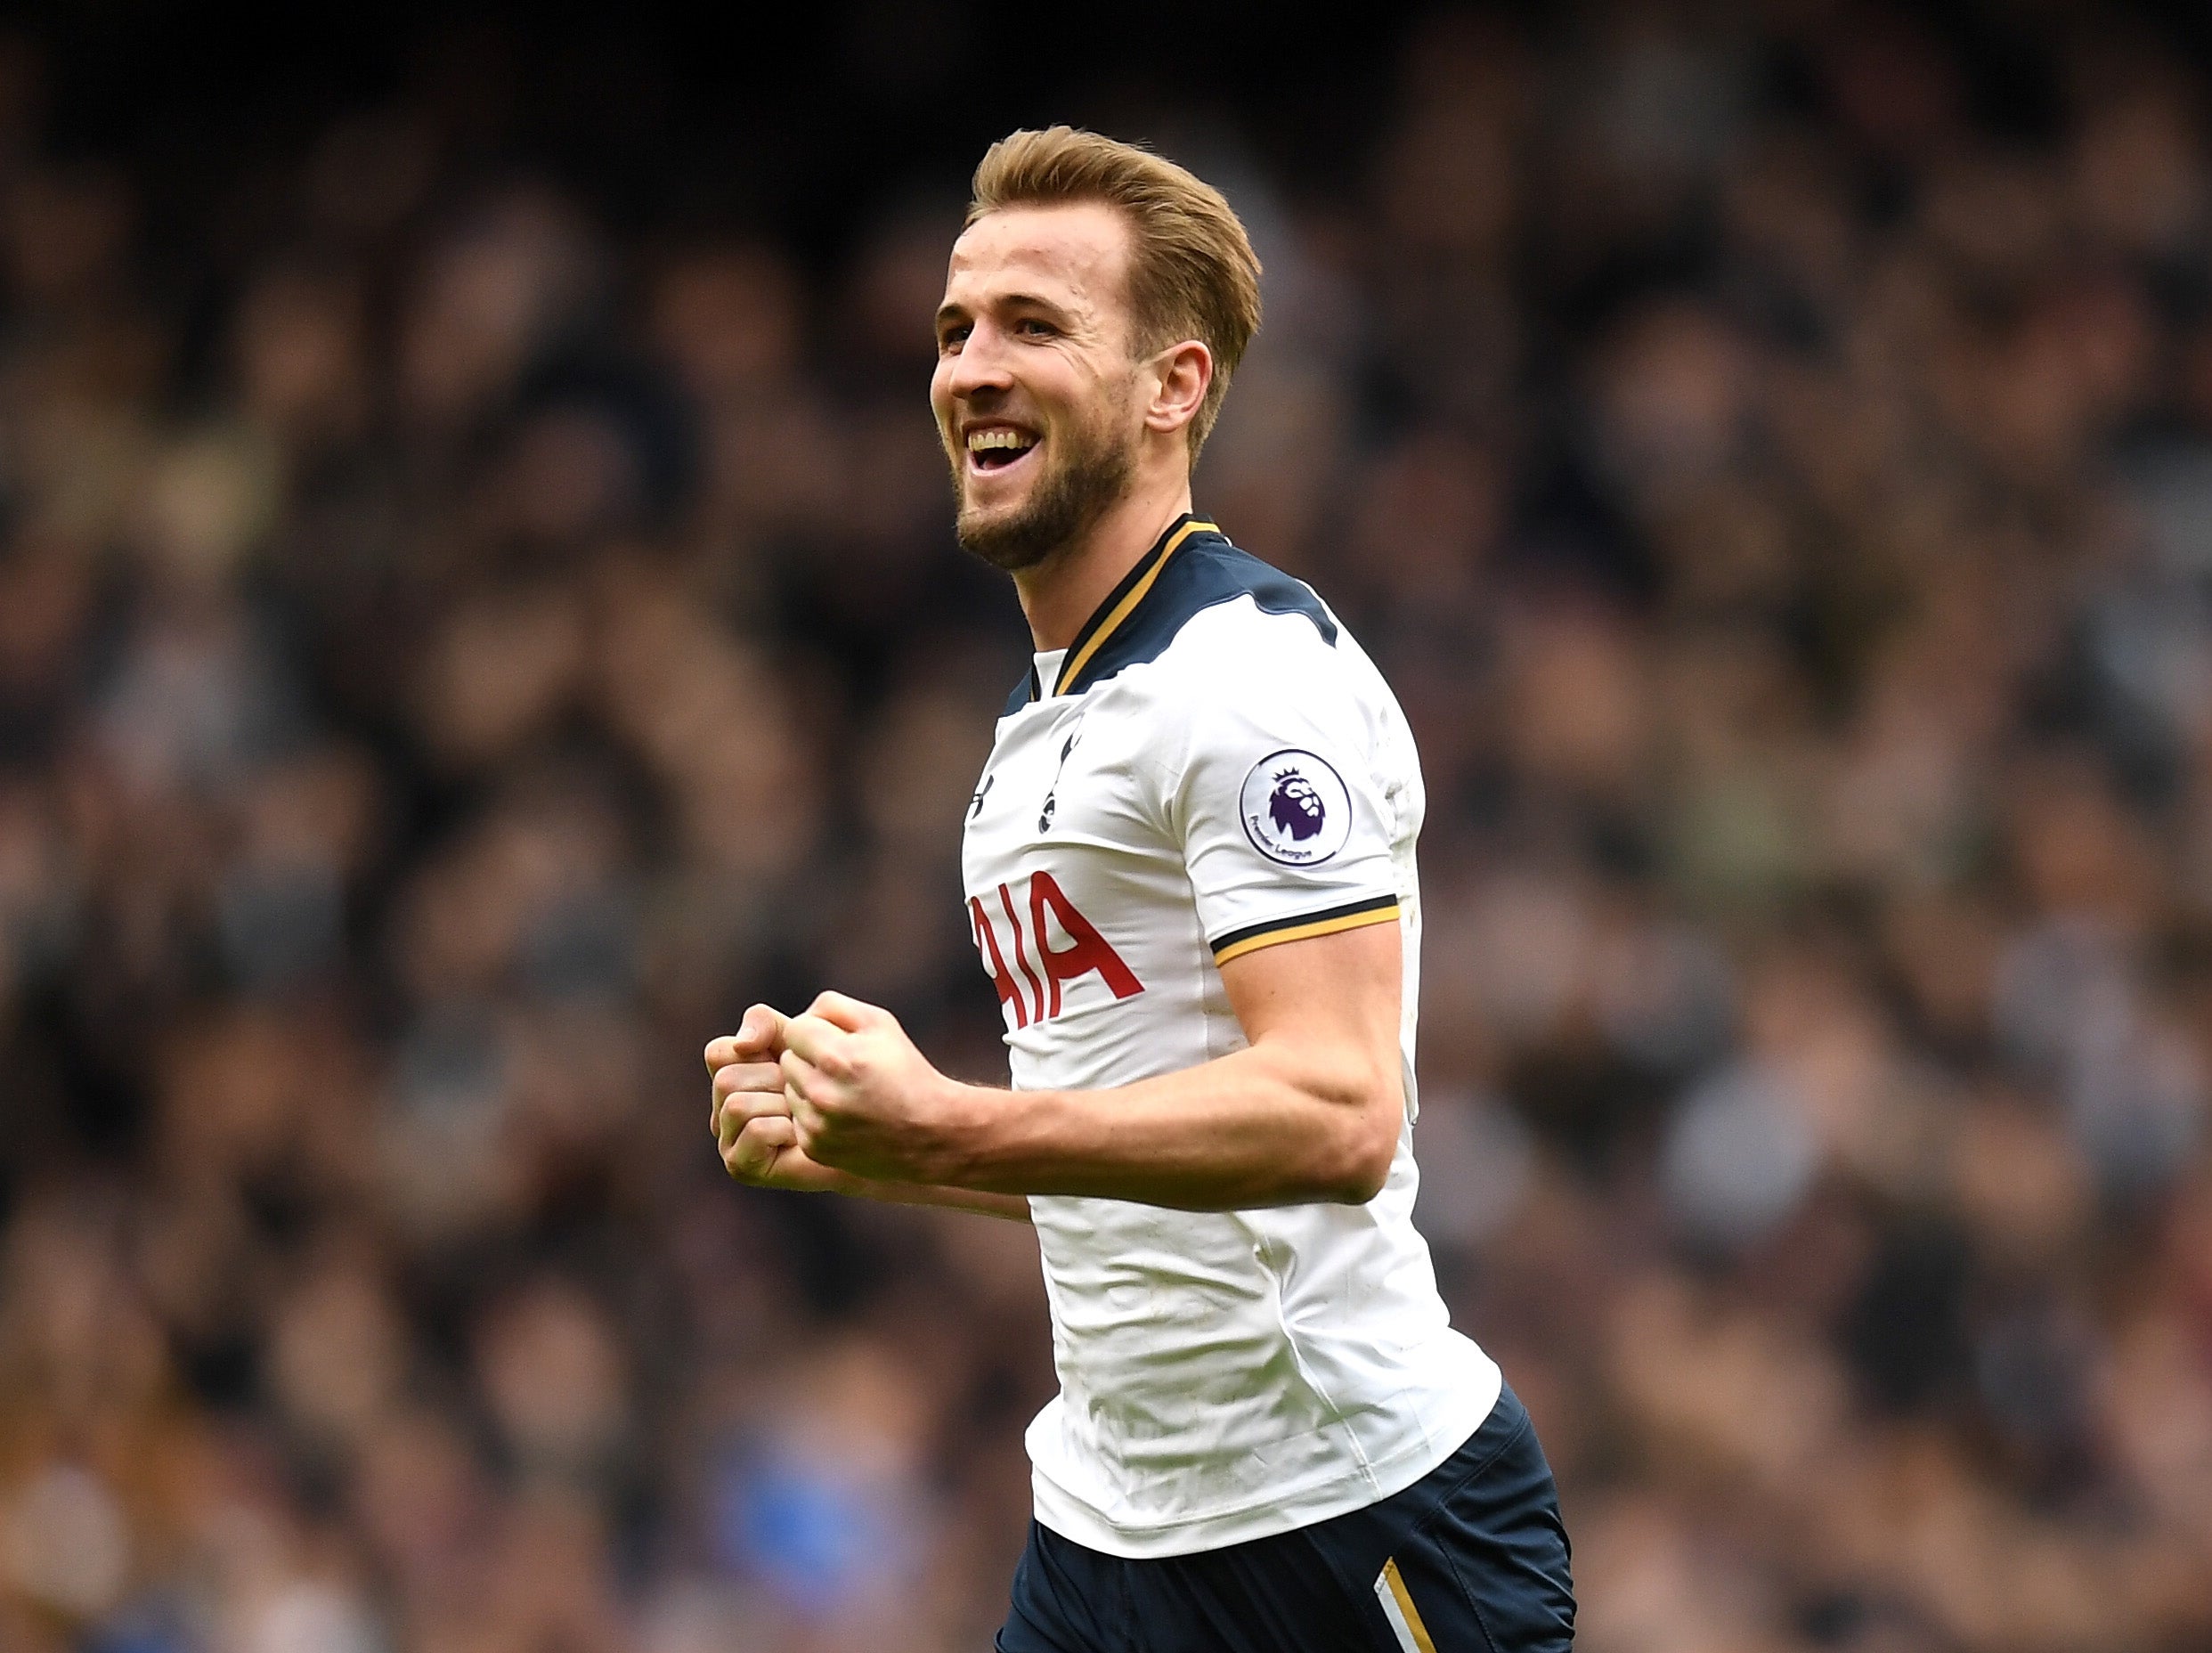 Spurs have zero interest in selling their star player to a Premier League rival